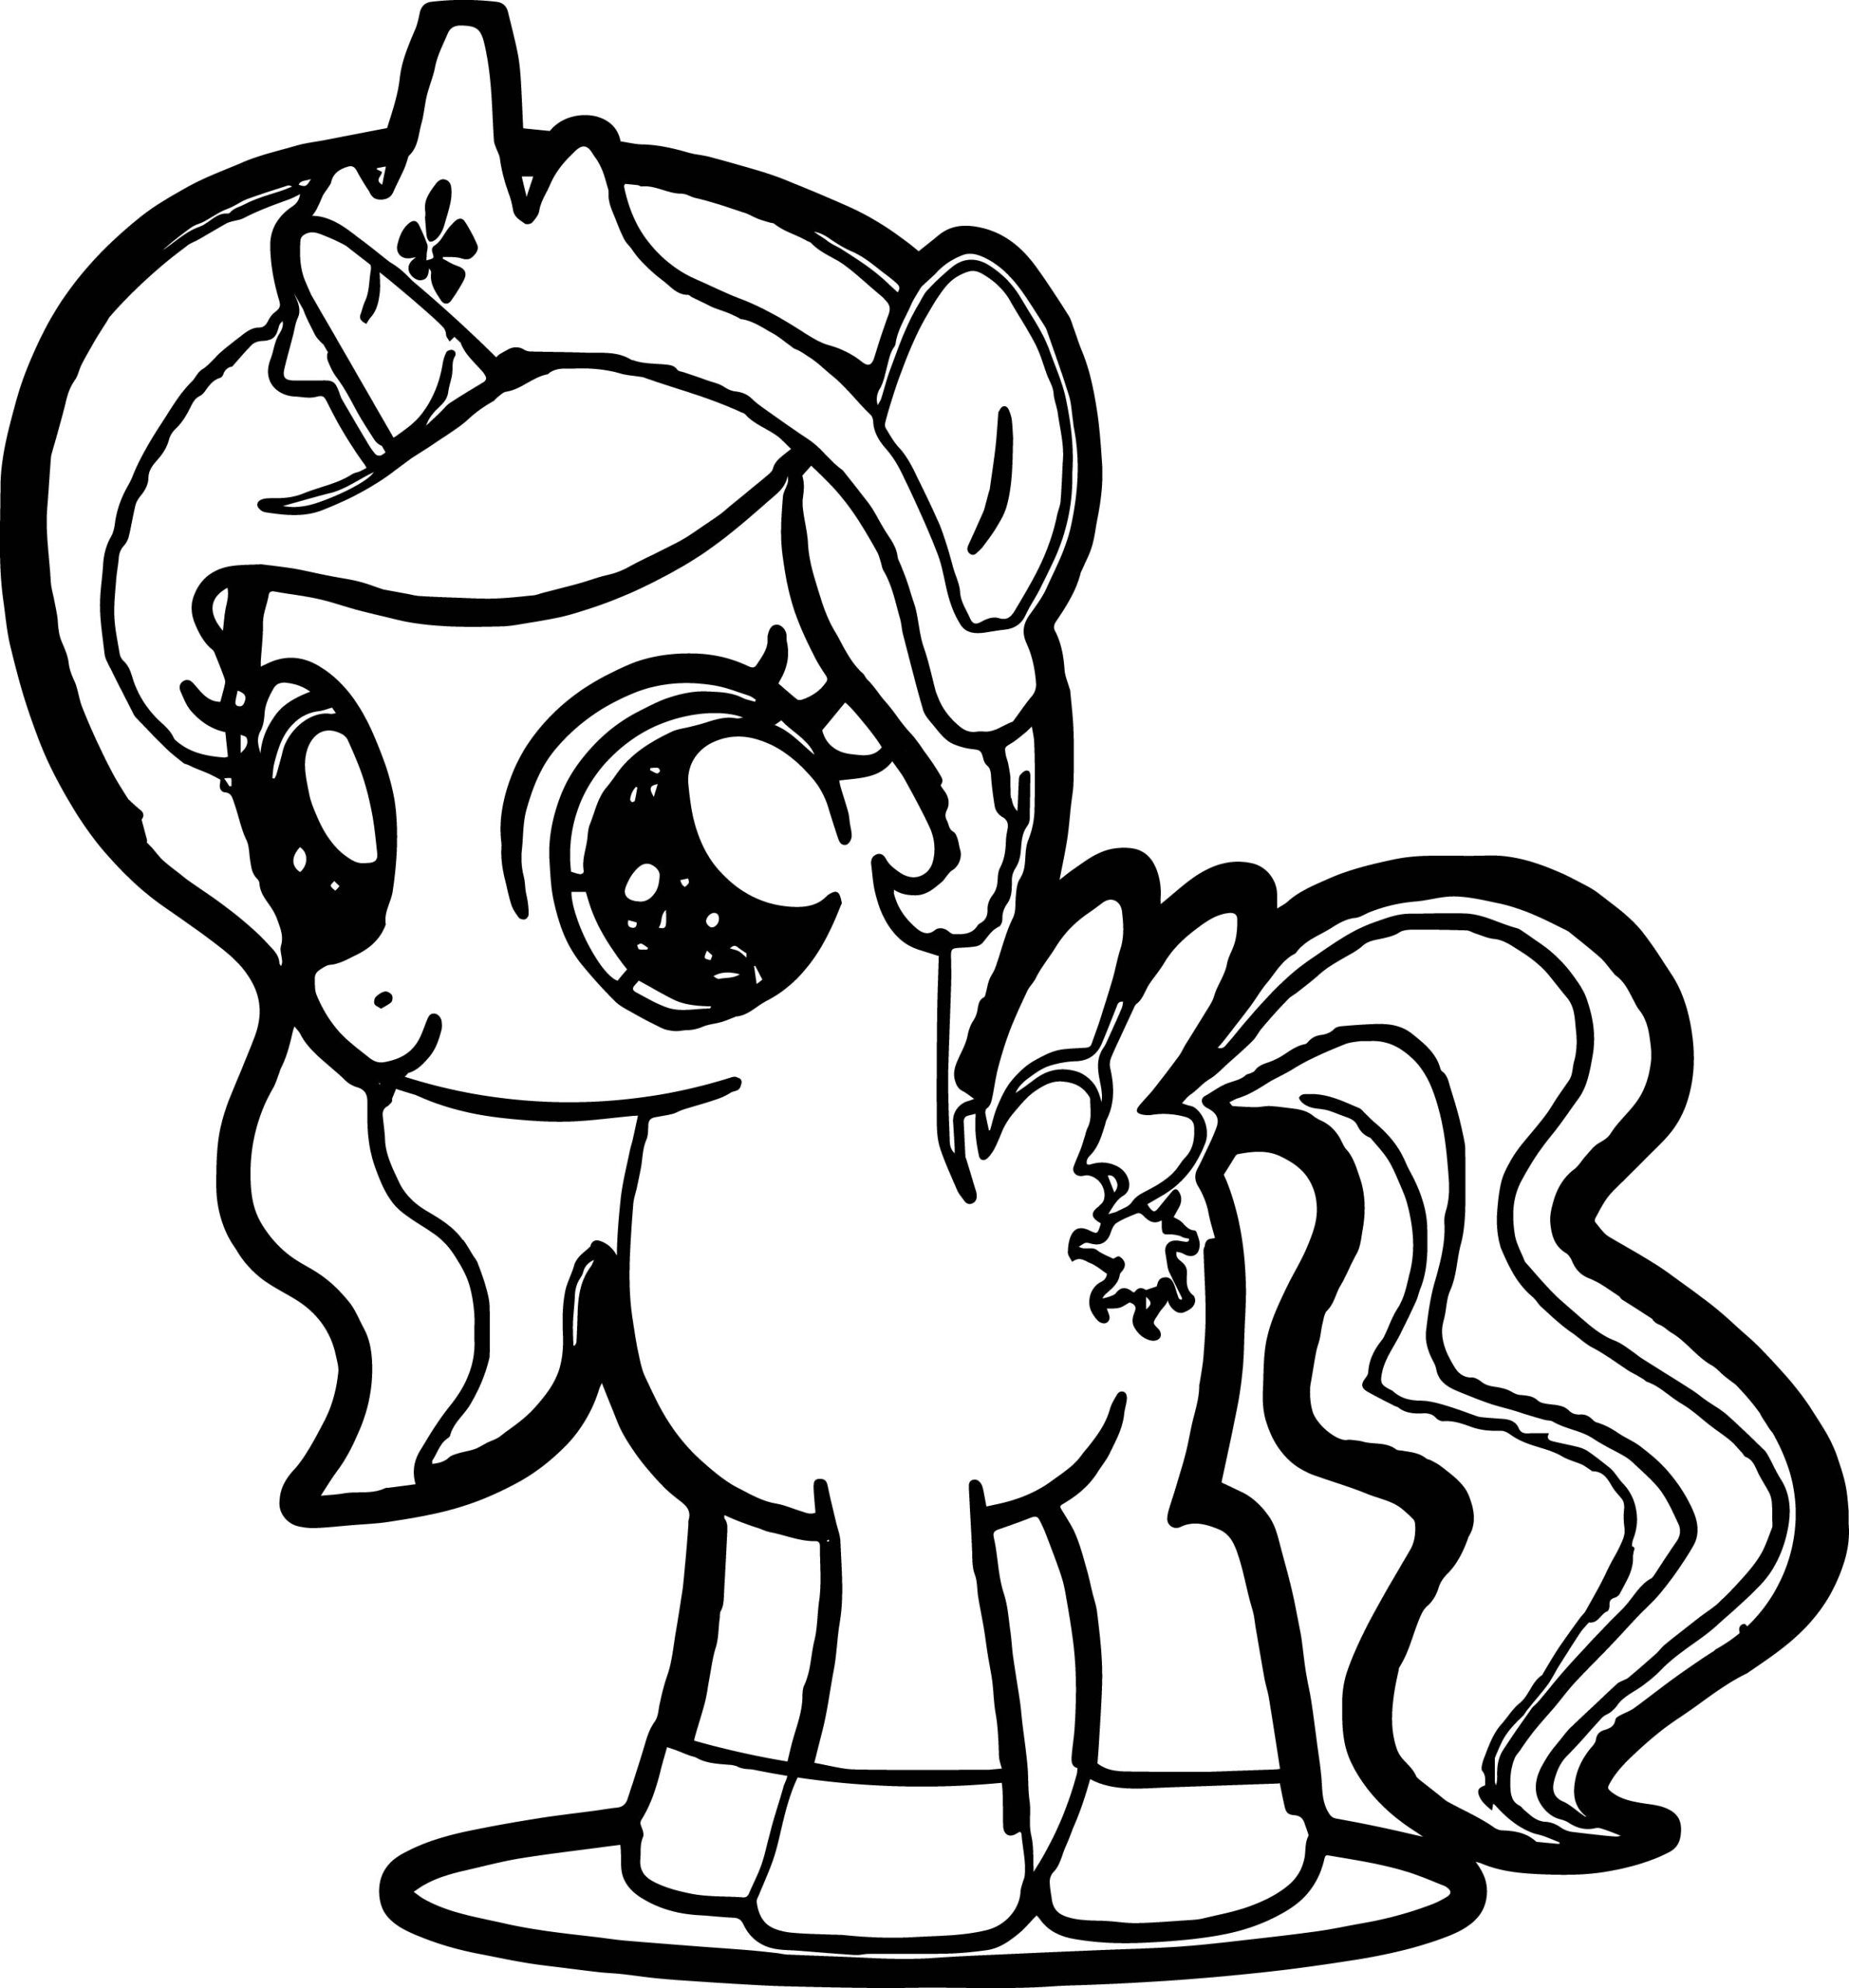 My Little Pony Scootaloo Coloring Pages At Getcolorings | Free intérieur Dessin My Little Poney